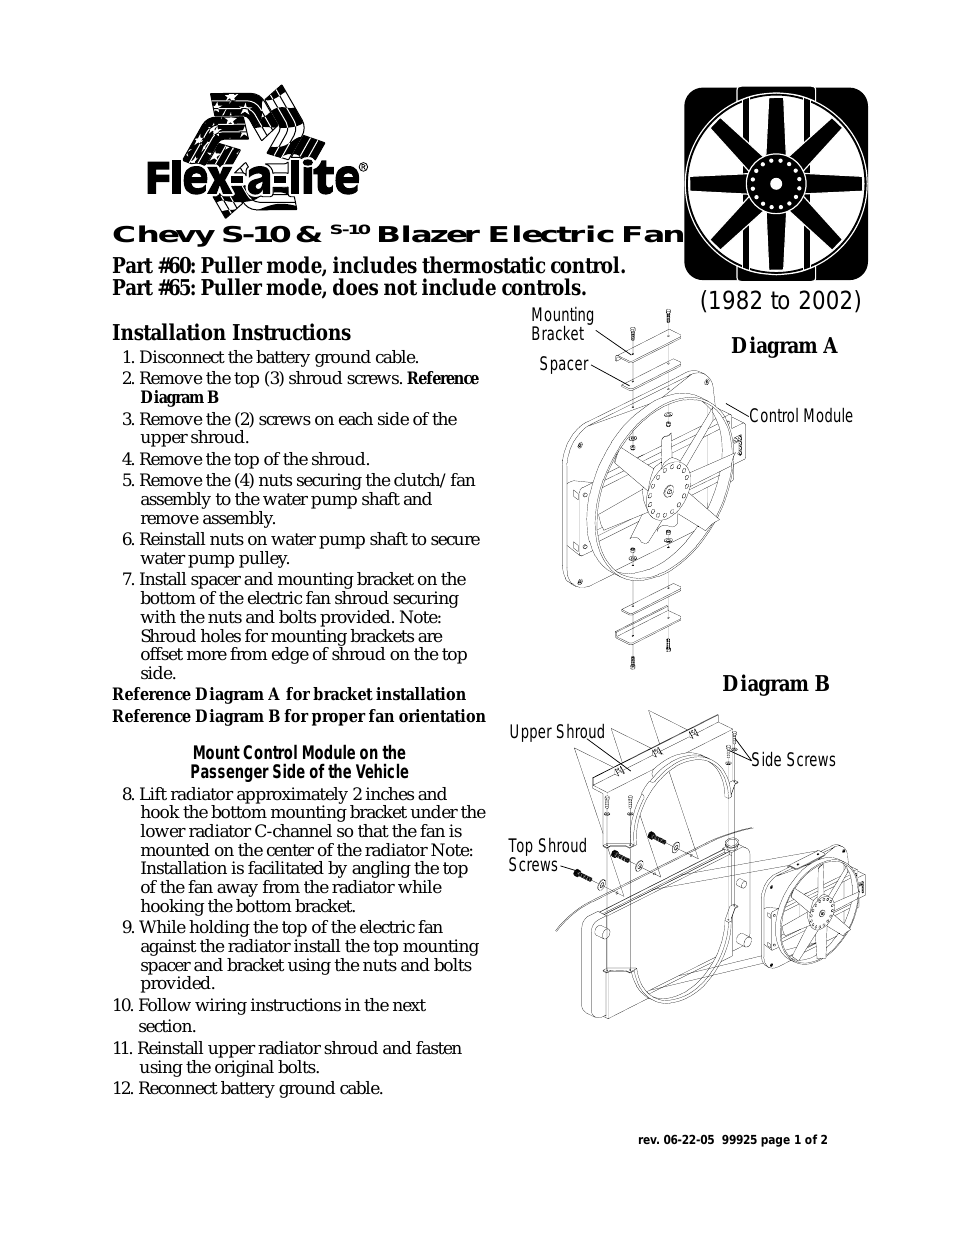 65: Puller mode, does not include controls Chevy S-10 & S-10 Blazer Electric Fan